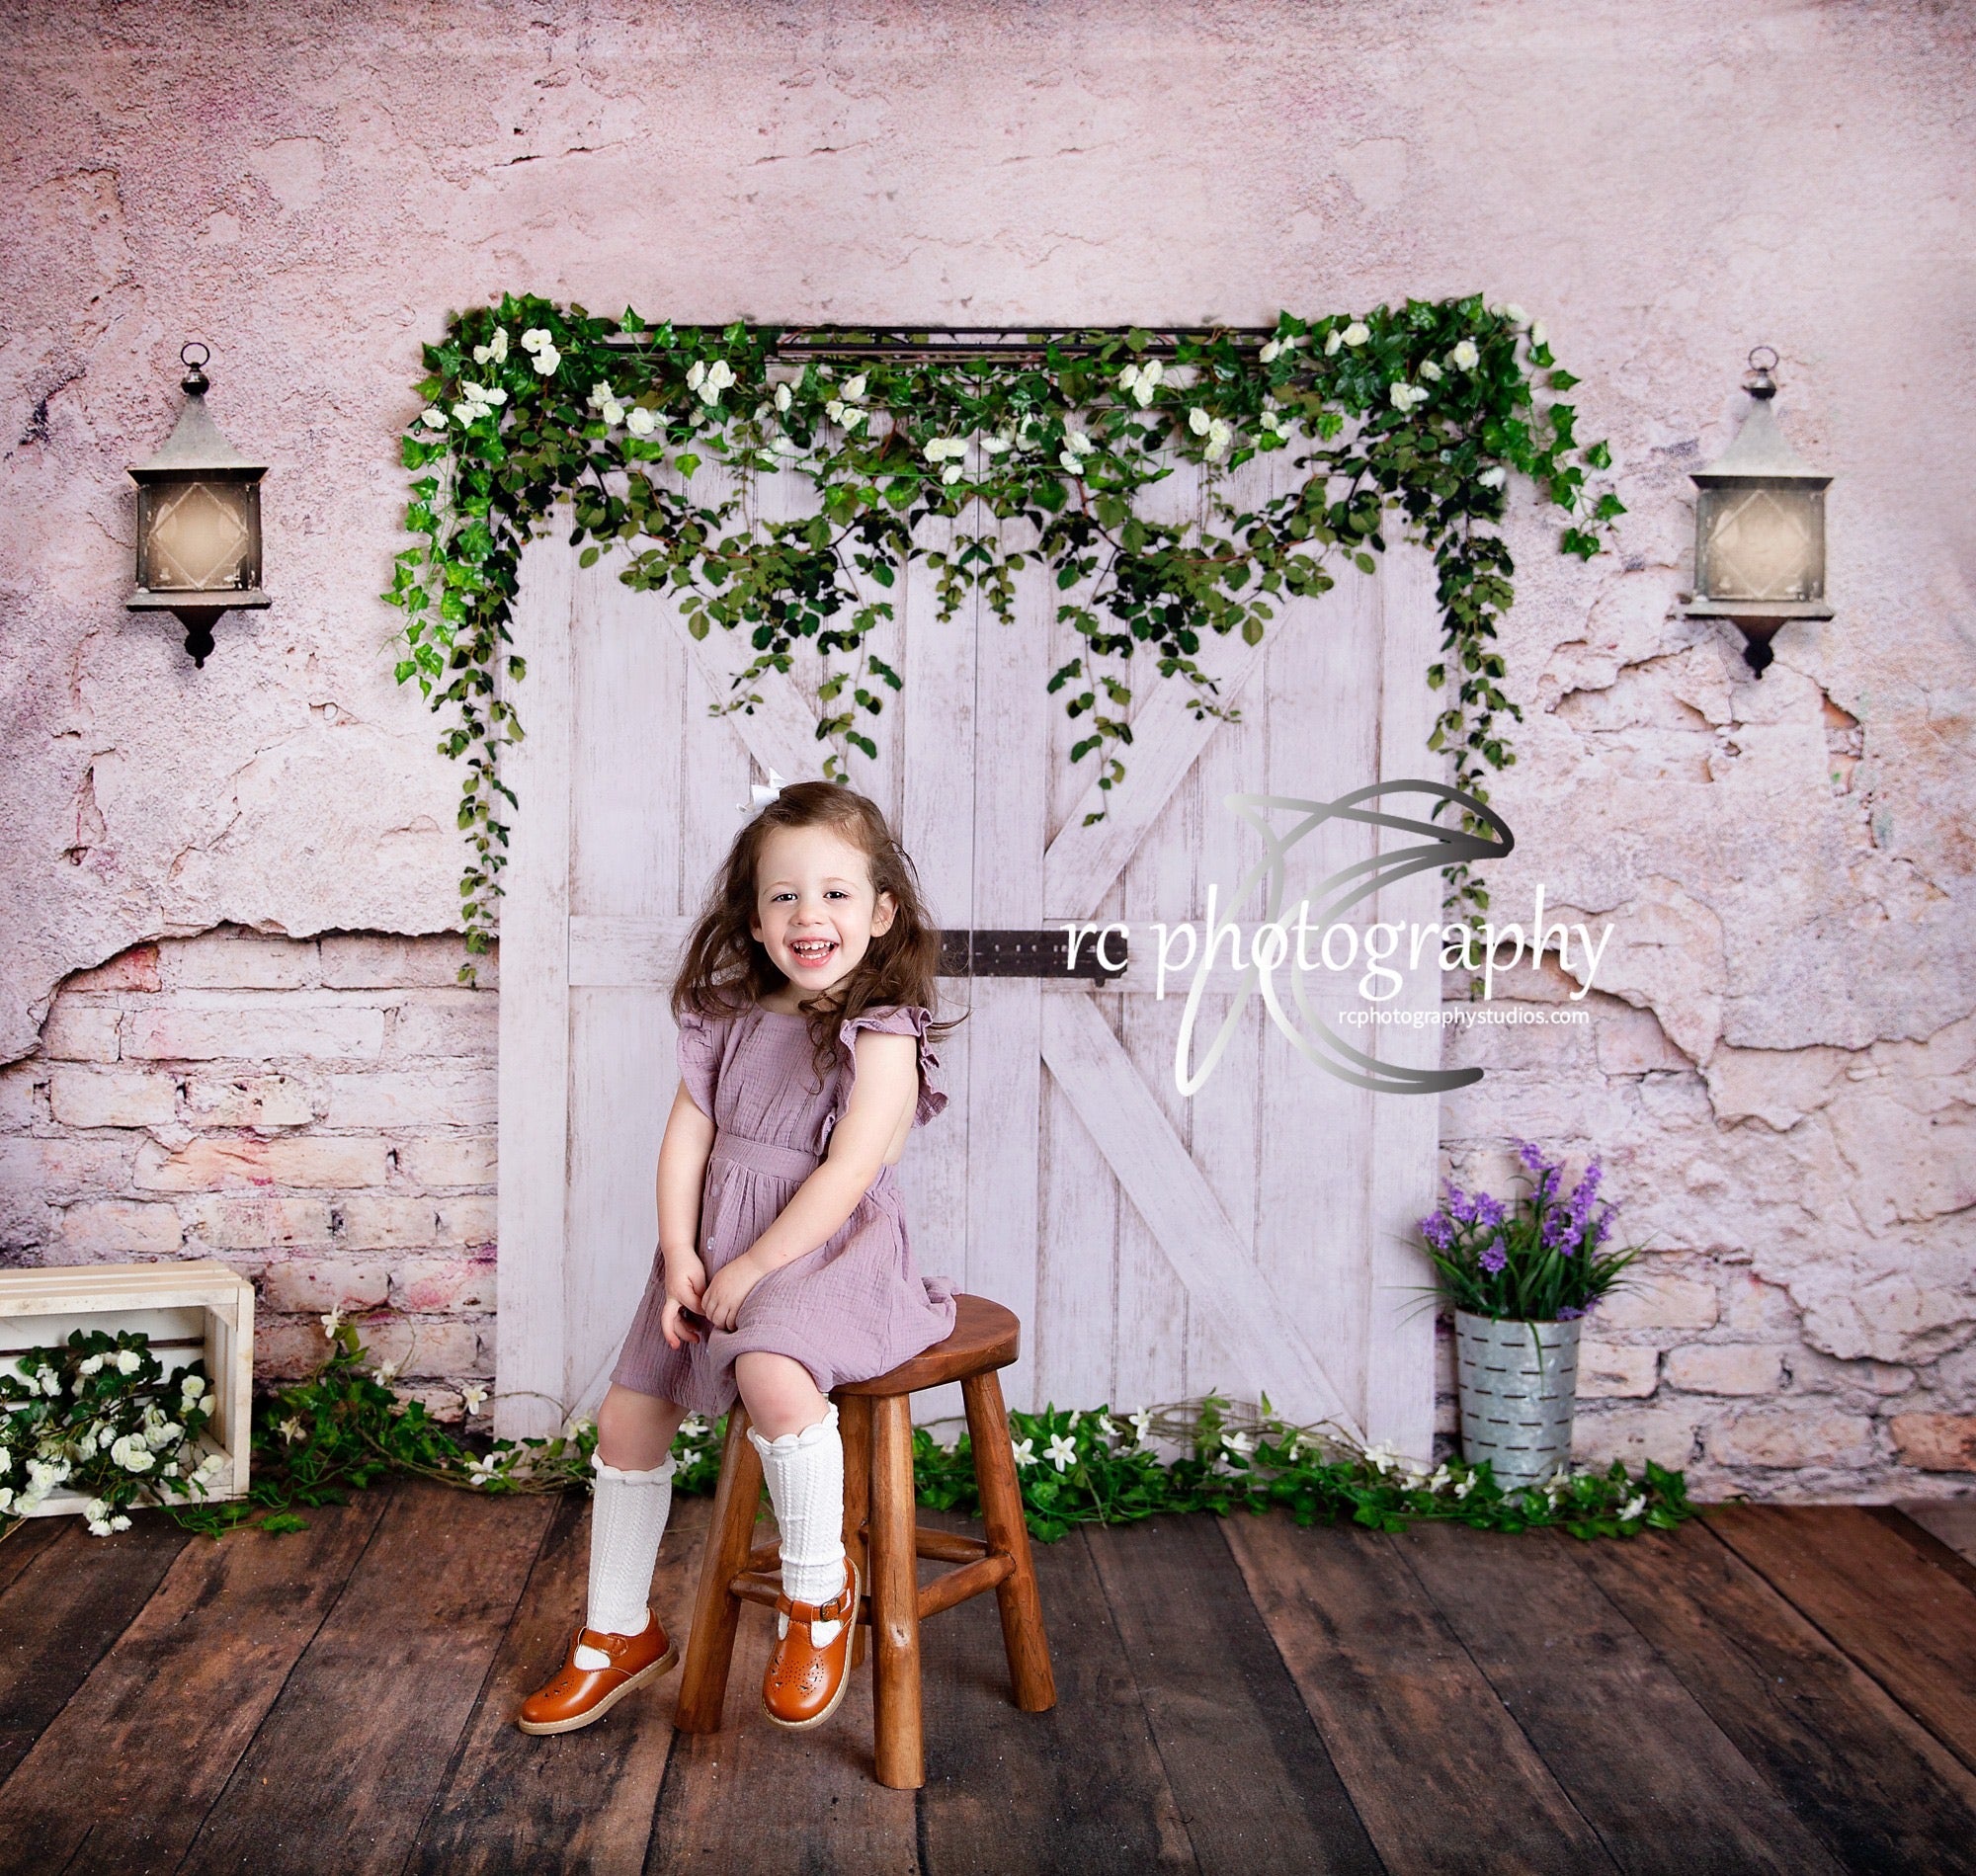 Kate Spring Backdrop Vintage wall Barn Door for Photography